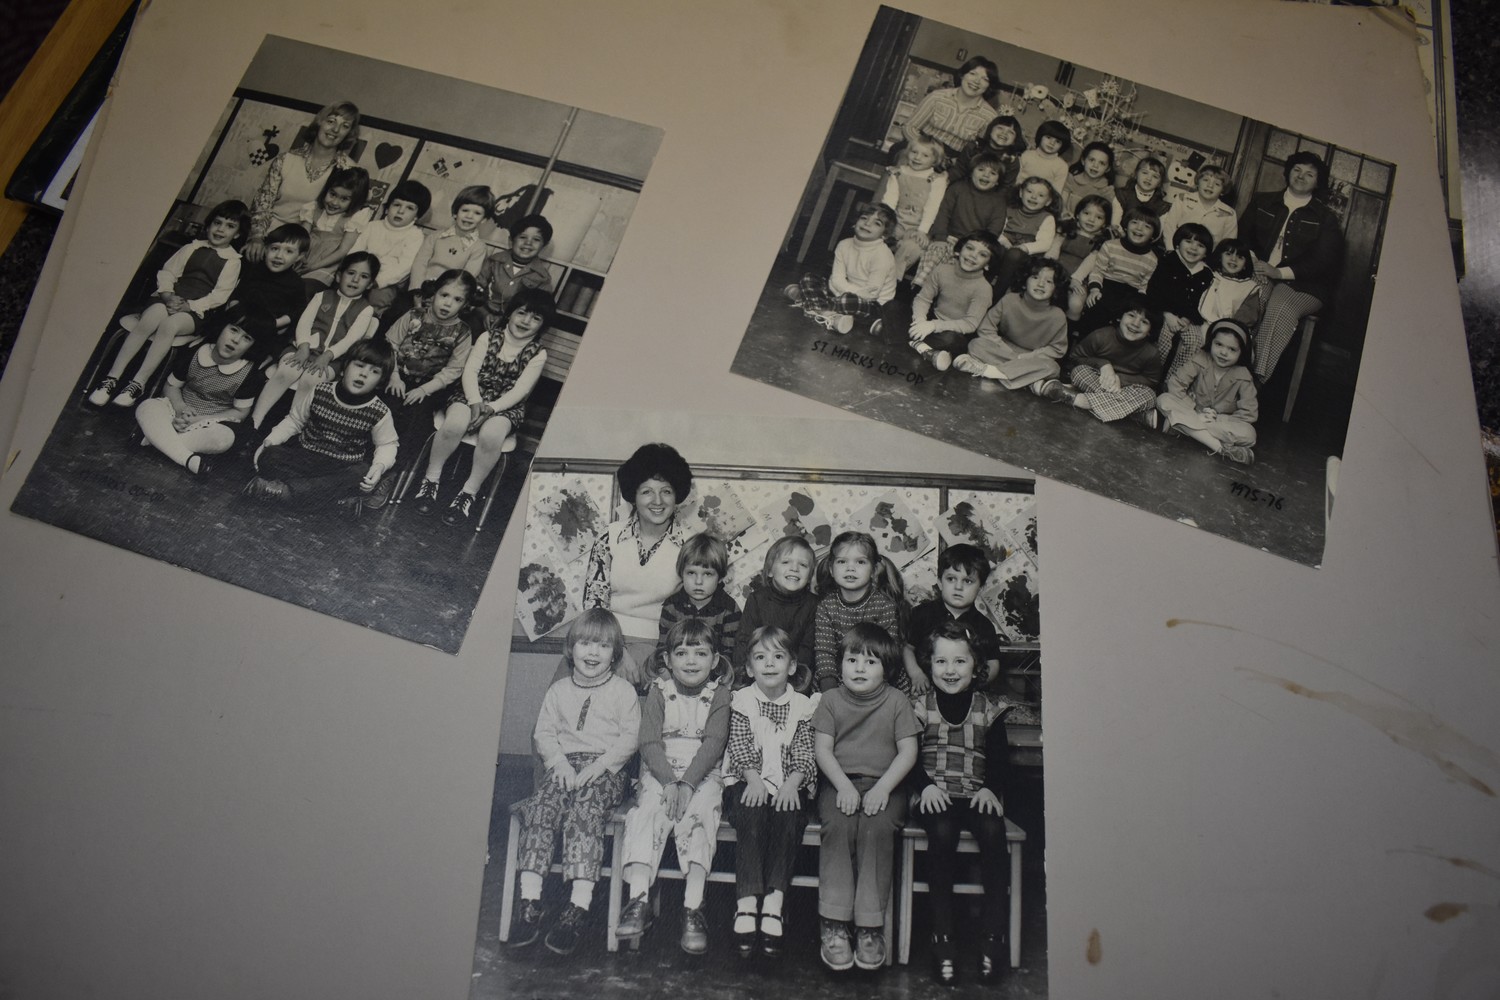 A placard at the school has photos of classes dating back to the 1970s.